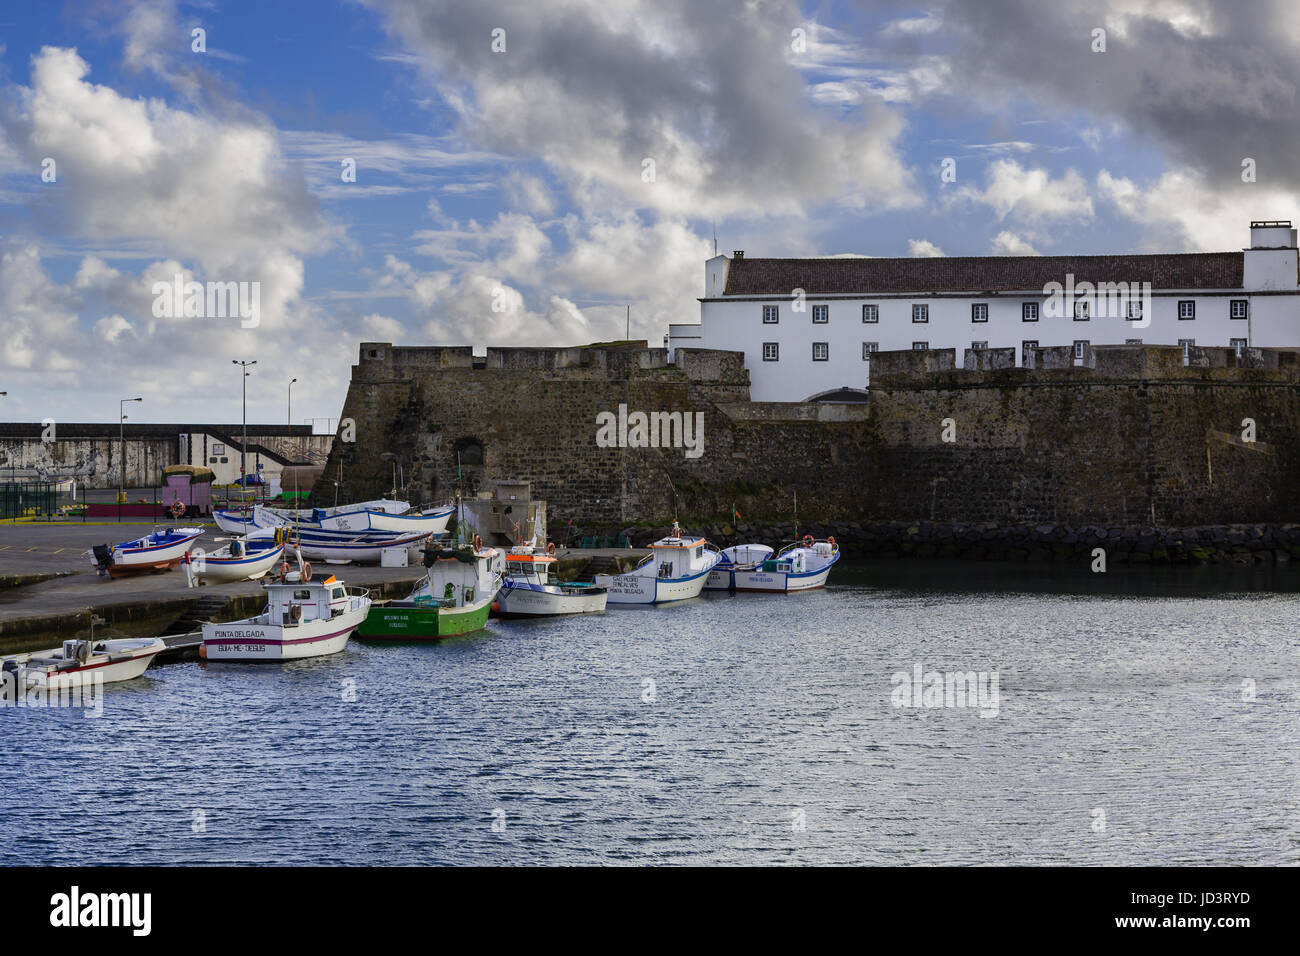 Ponta Delgada on the island of Sao Miguel is the capital of the archipelago of the Azores. The former fortress is now the Military Museum. Stock Photo